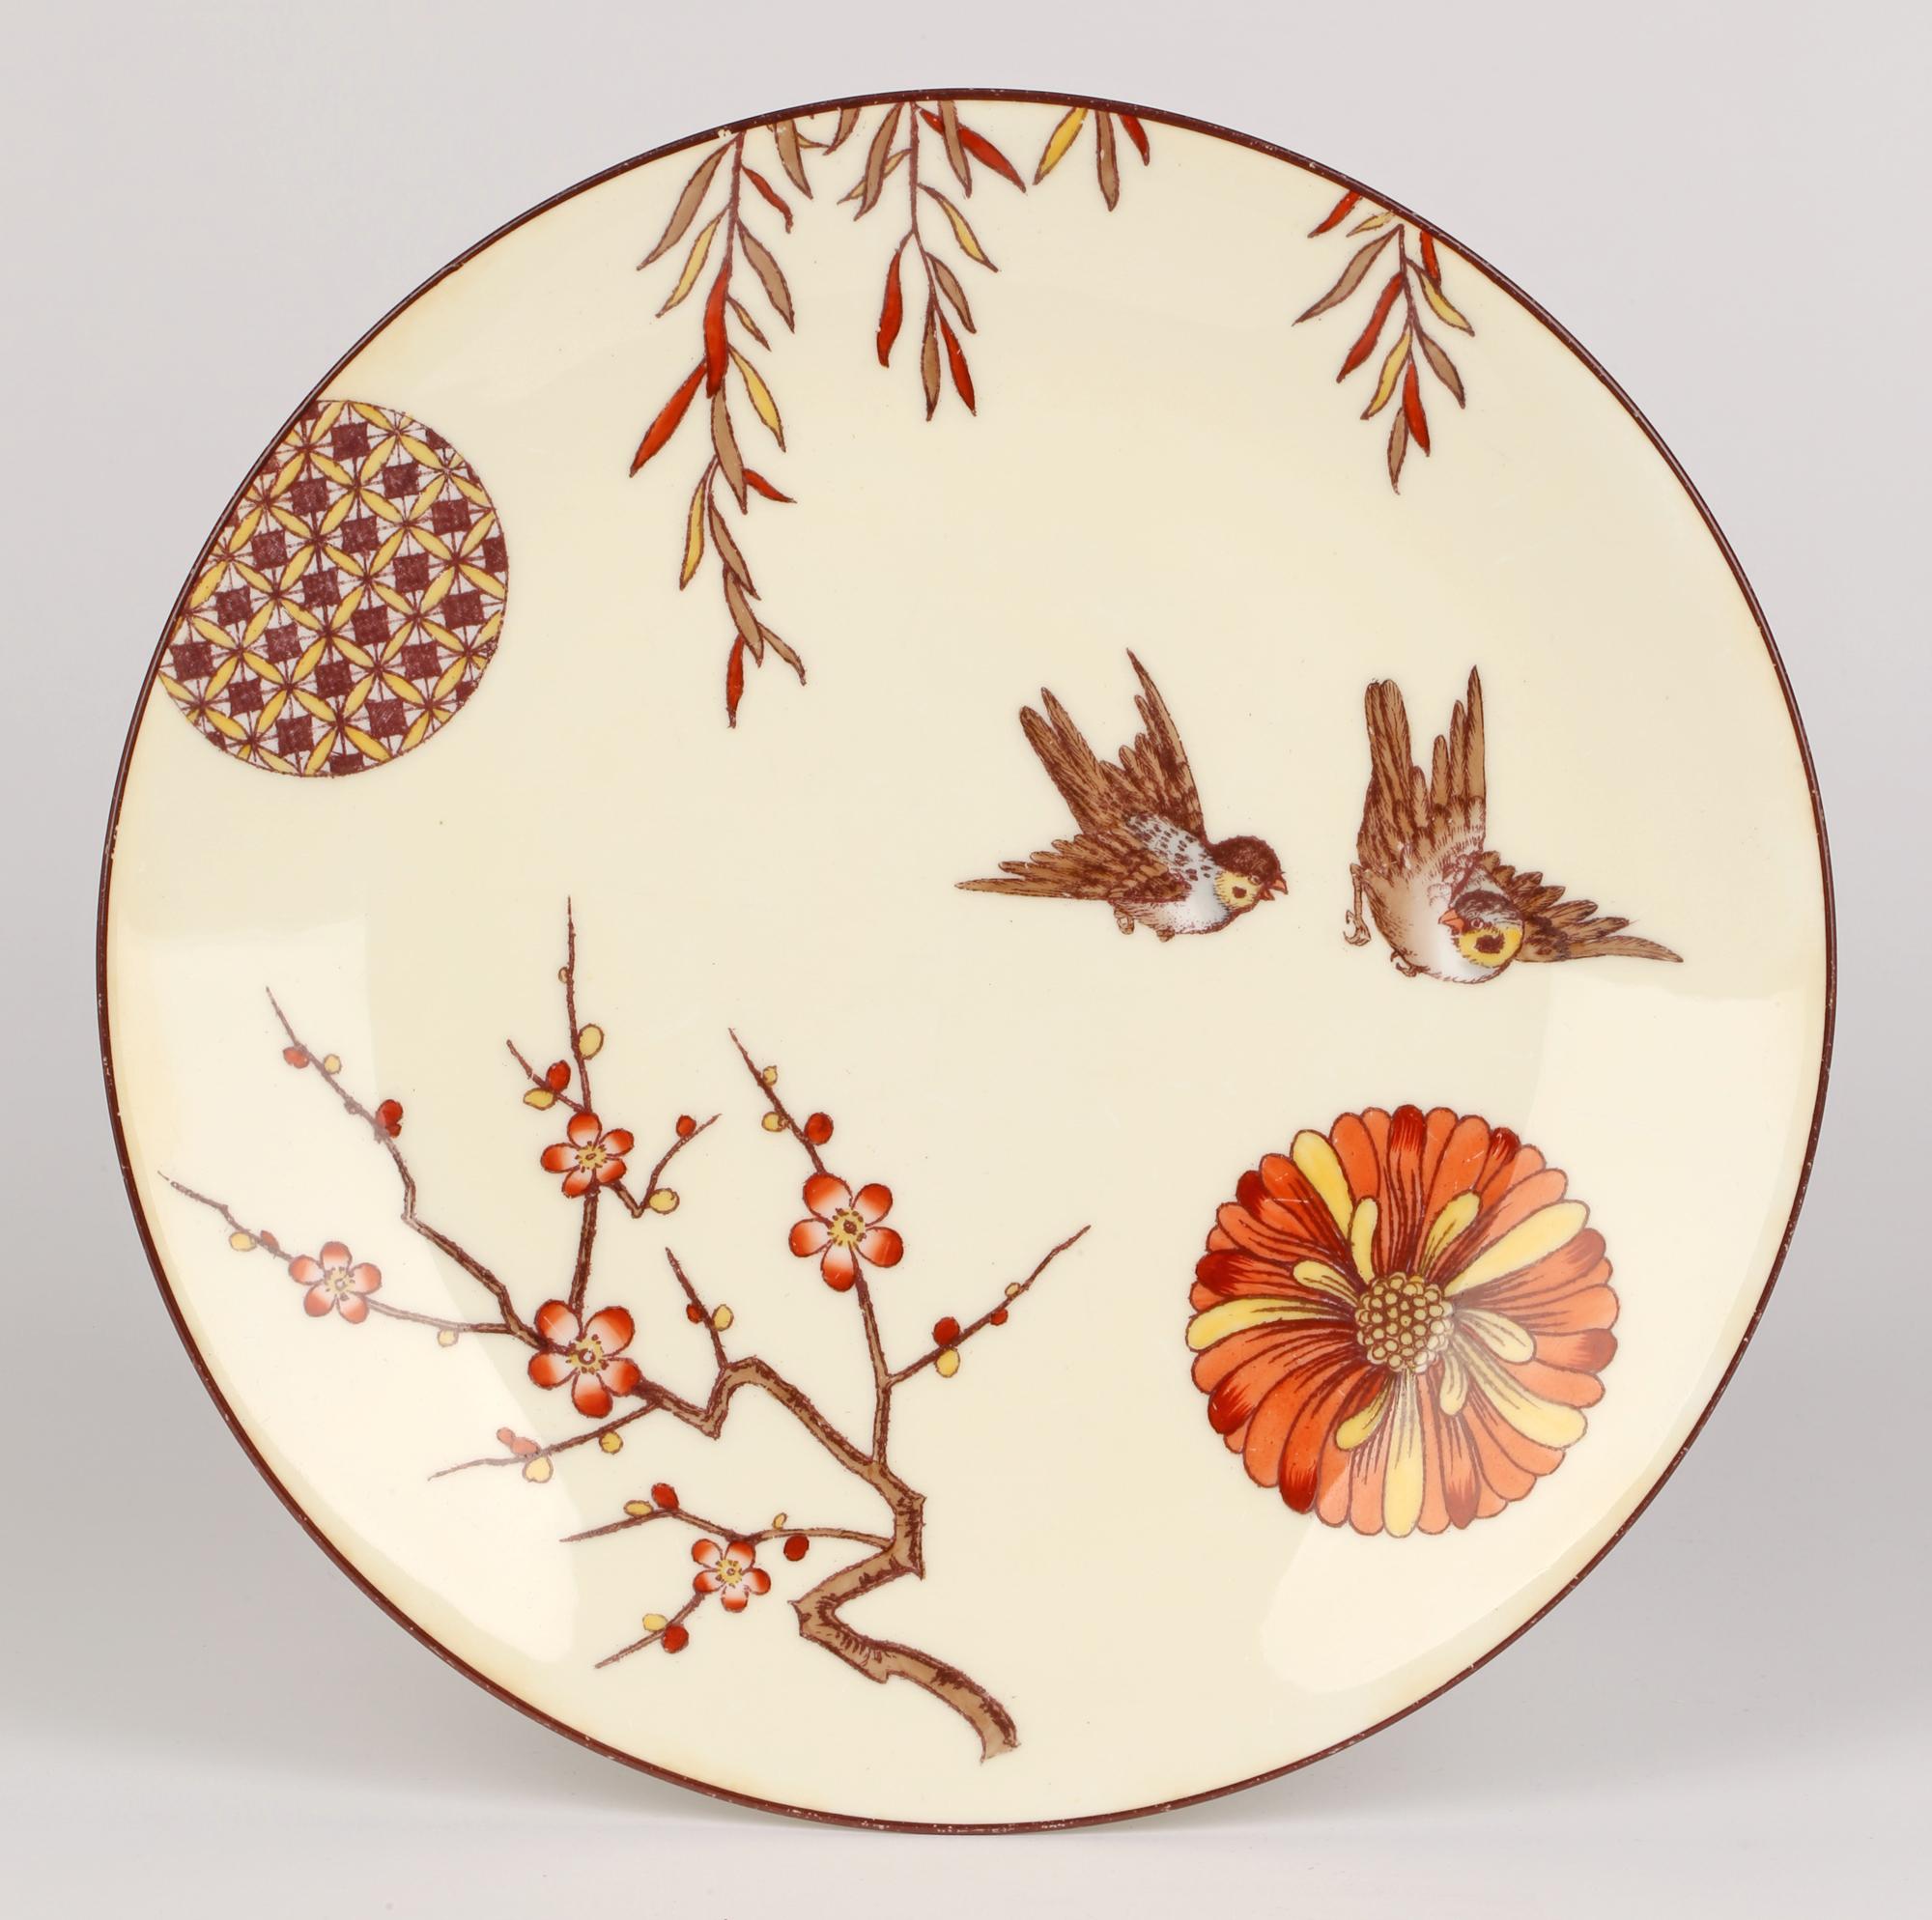 Minton Porcelain Cabinet Plate Attributed to Christopher Dresser, 1880 For Sale 6